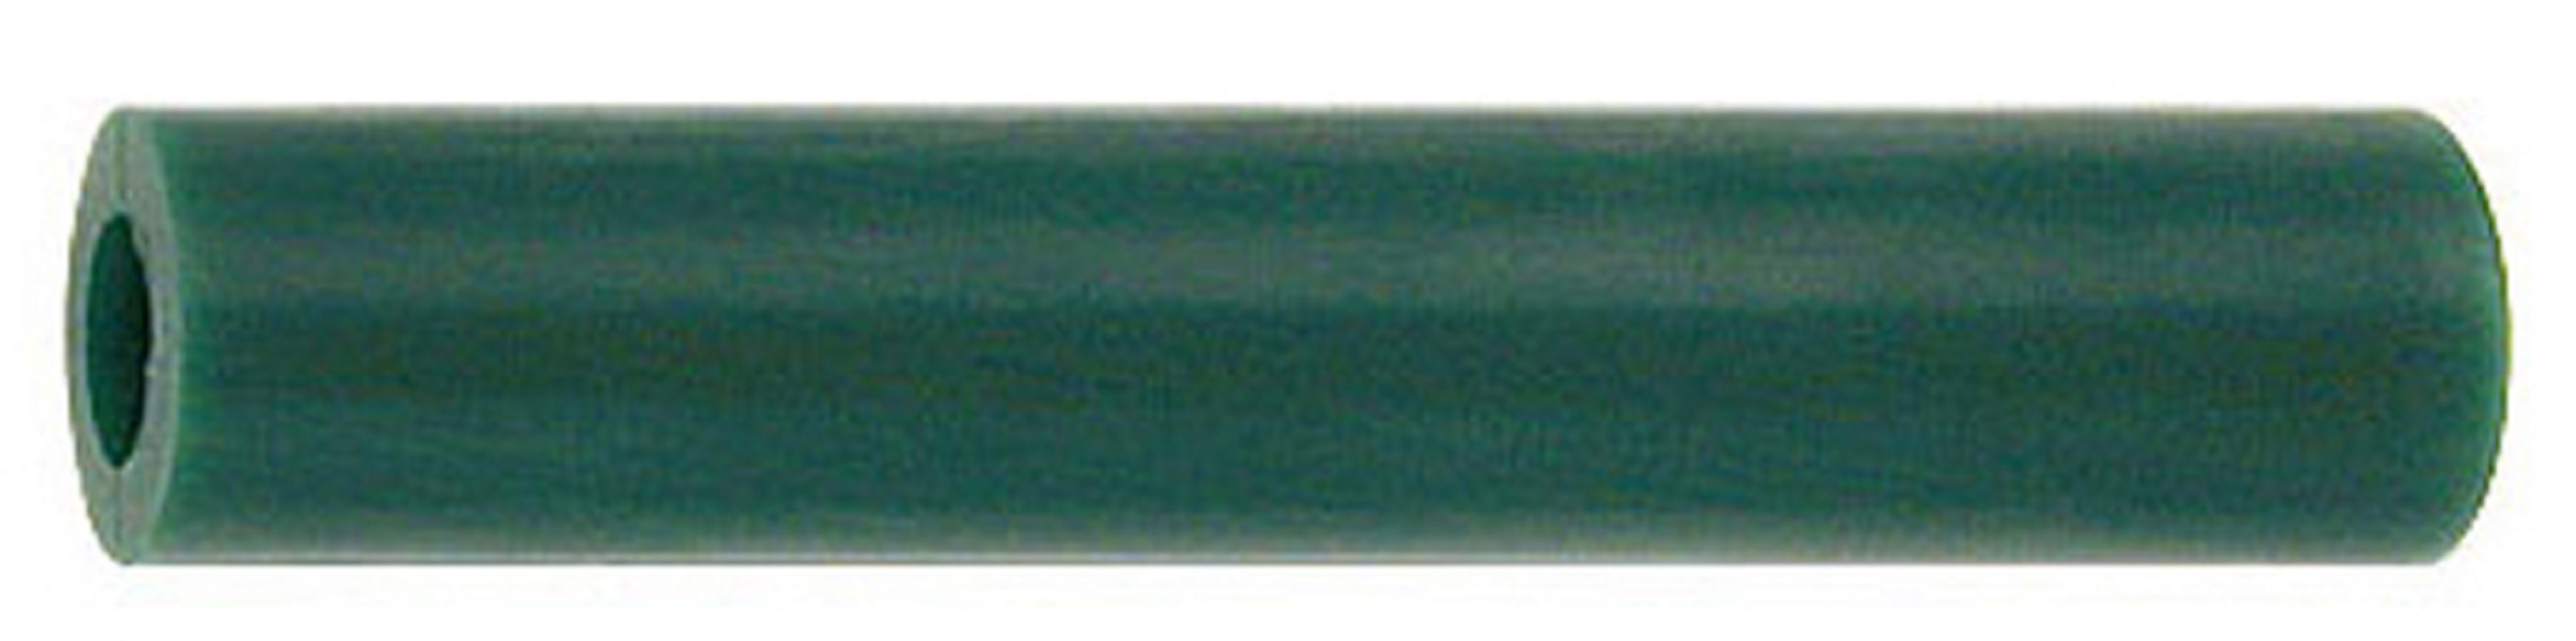 FERRIS FILE-A-WAX TUBE CENTER HOLE GREEN 7/8"x5/8" 22mm x15mm, t875 - Click Image to Close